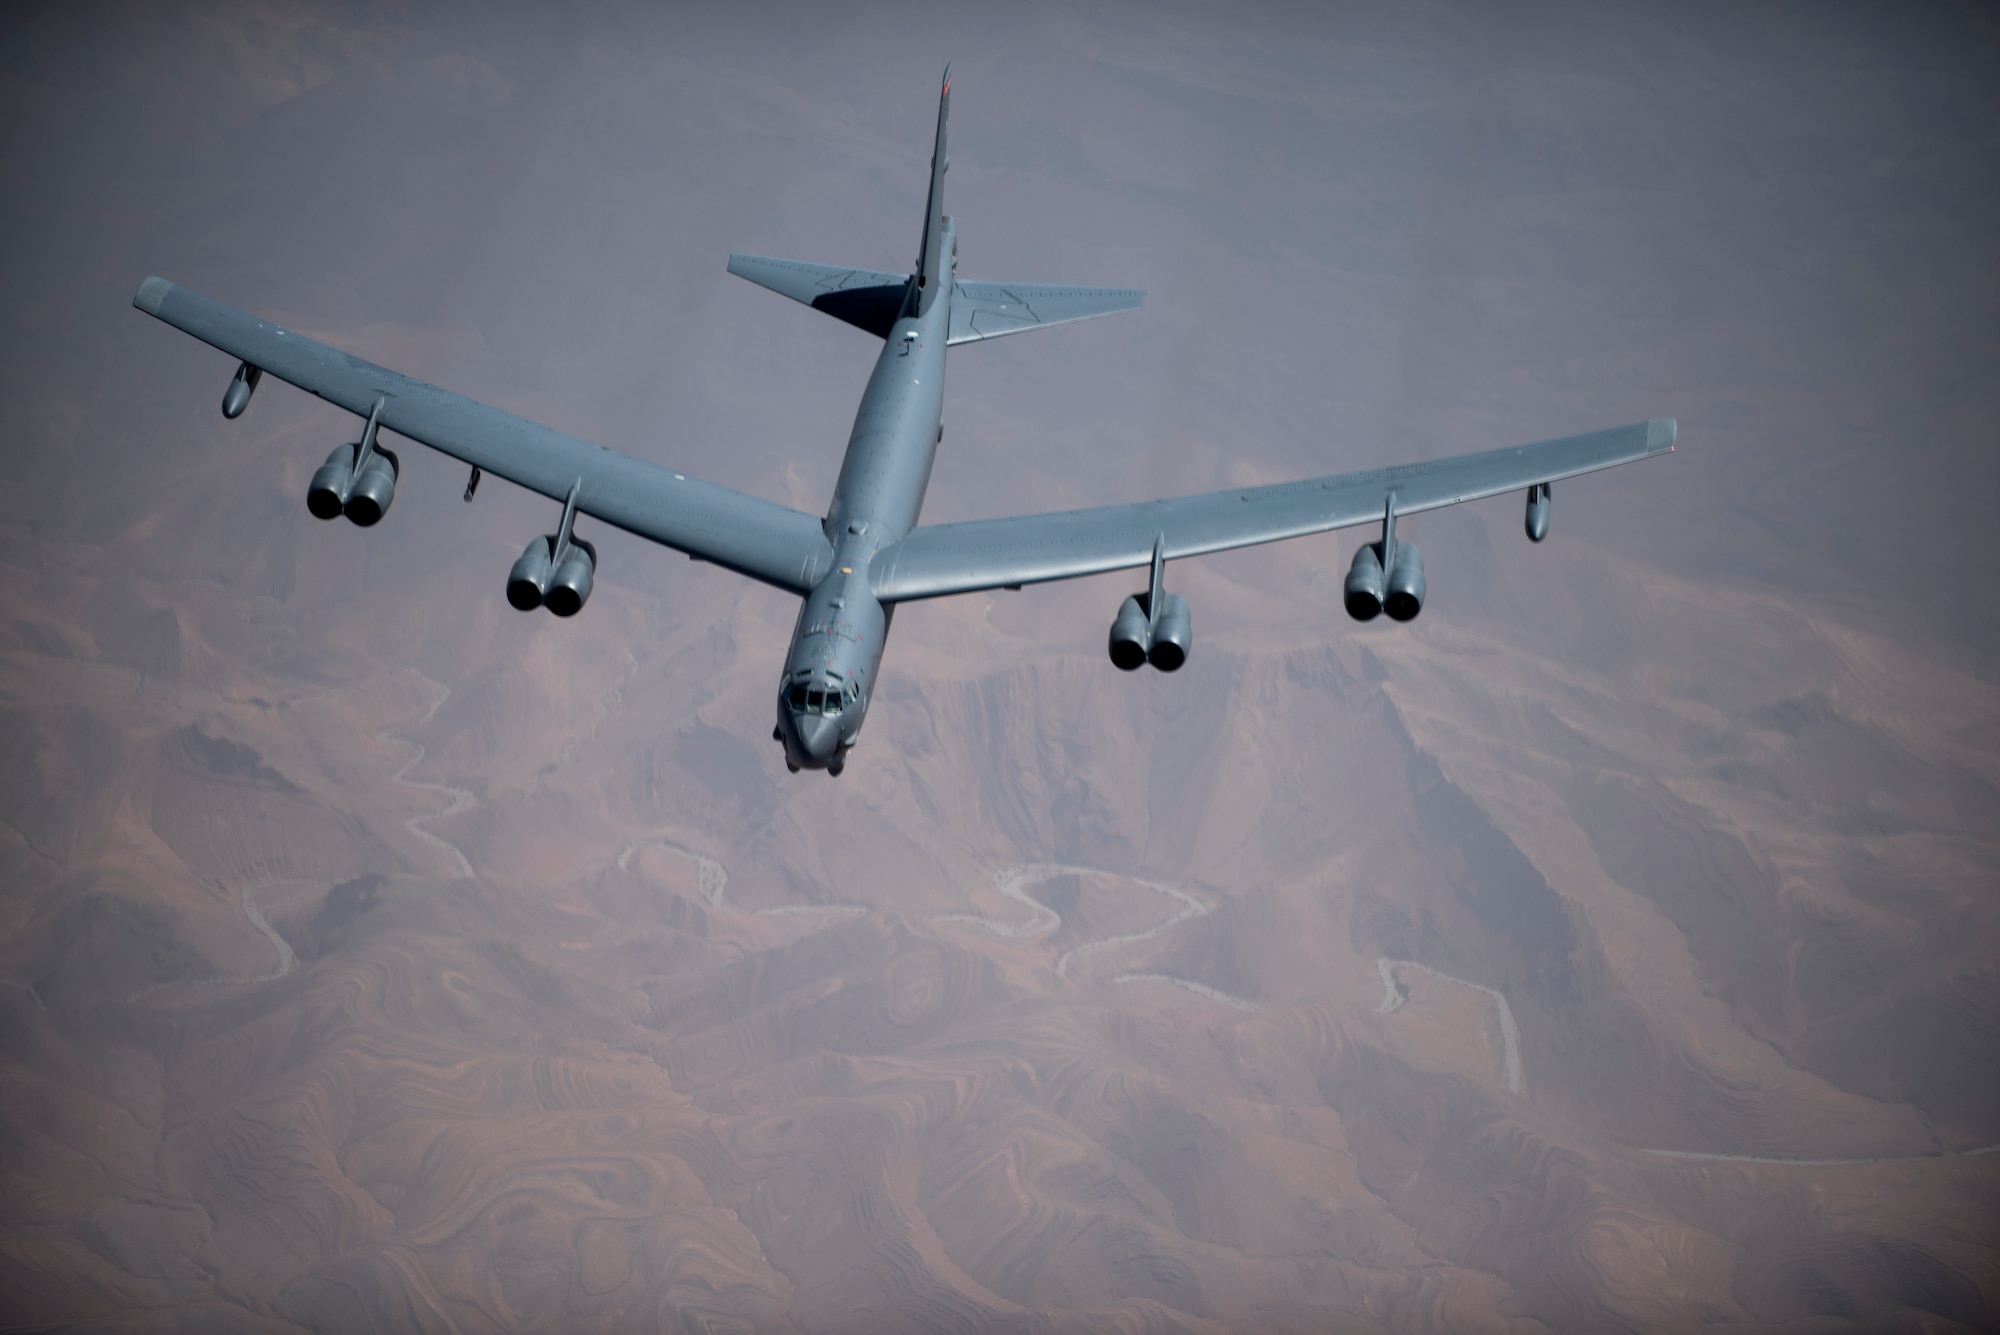 A B-52 Stratofortress bomber flies above Morocco during Exercise African Lion April 20, 2018. Various units from the U.S. Armed Forces will conduct multilateral and stability operations training with units from the Royal Moroccan Armed Forces in the Kingdom of Morocco. This combined multilateral exercise is designed to improve interoperability and mutual understanding of each nation’s tactics, techniques and procedures while demonstrating the strong bond between the nation’s militaries. (U.S. Air Force photo/Senior Airman Malcolm Mayfield)